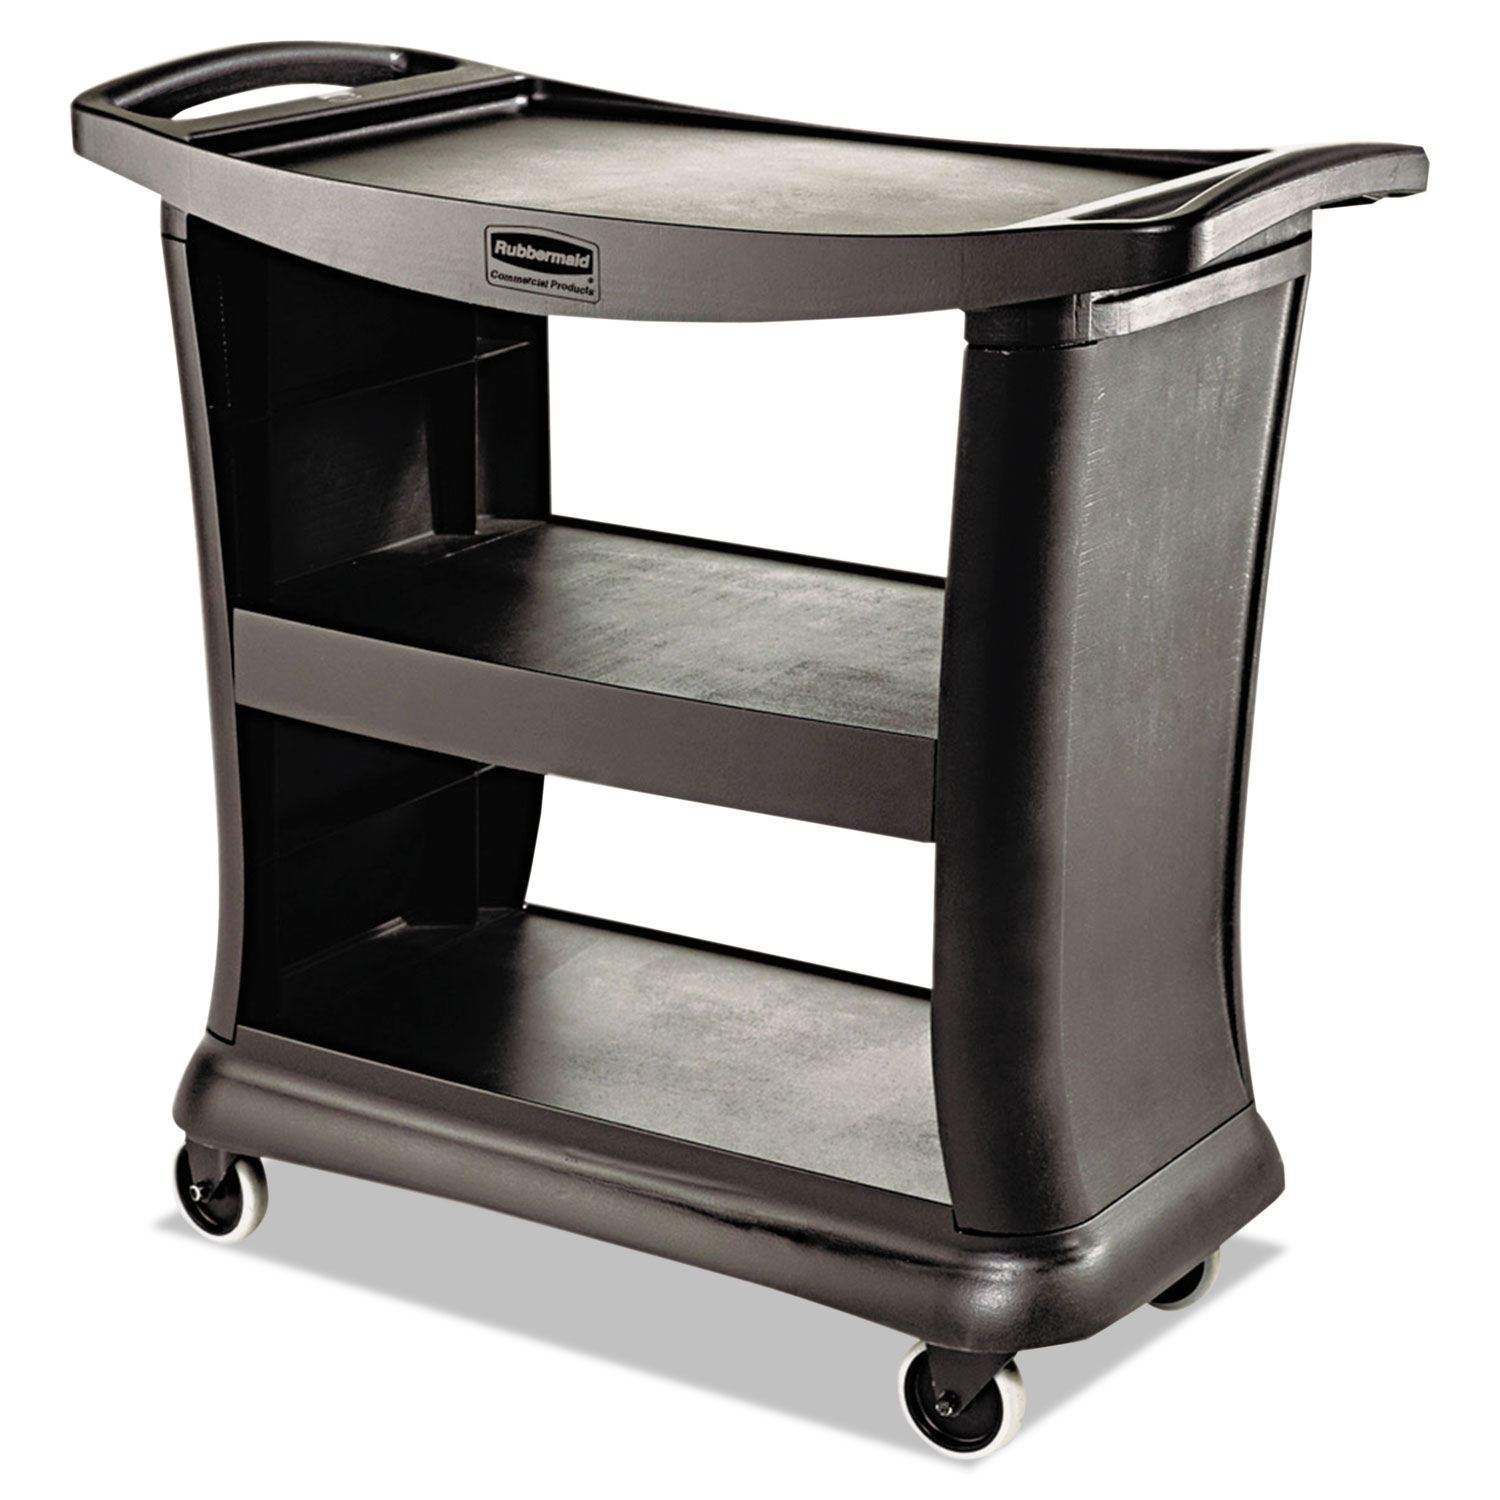 Rubbermaid Executive Janitorial Cleaning Cart High Security Black